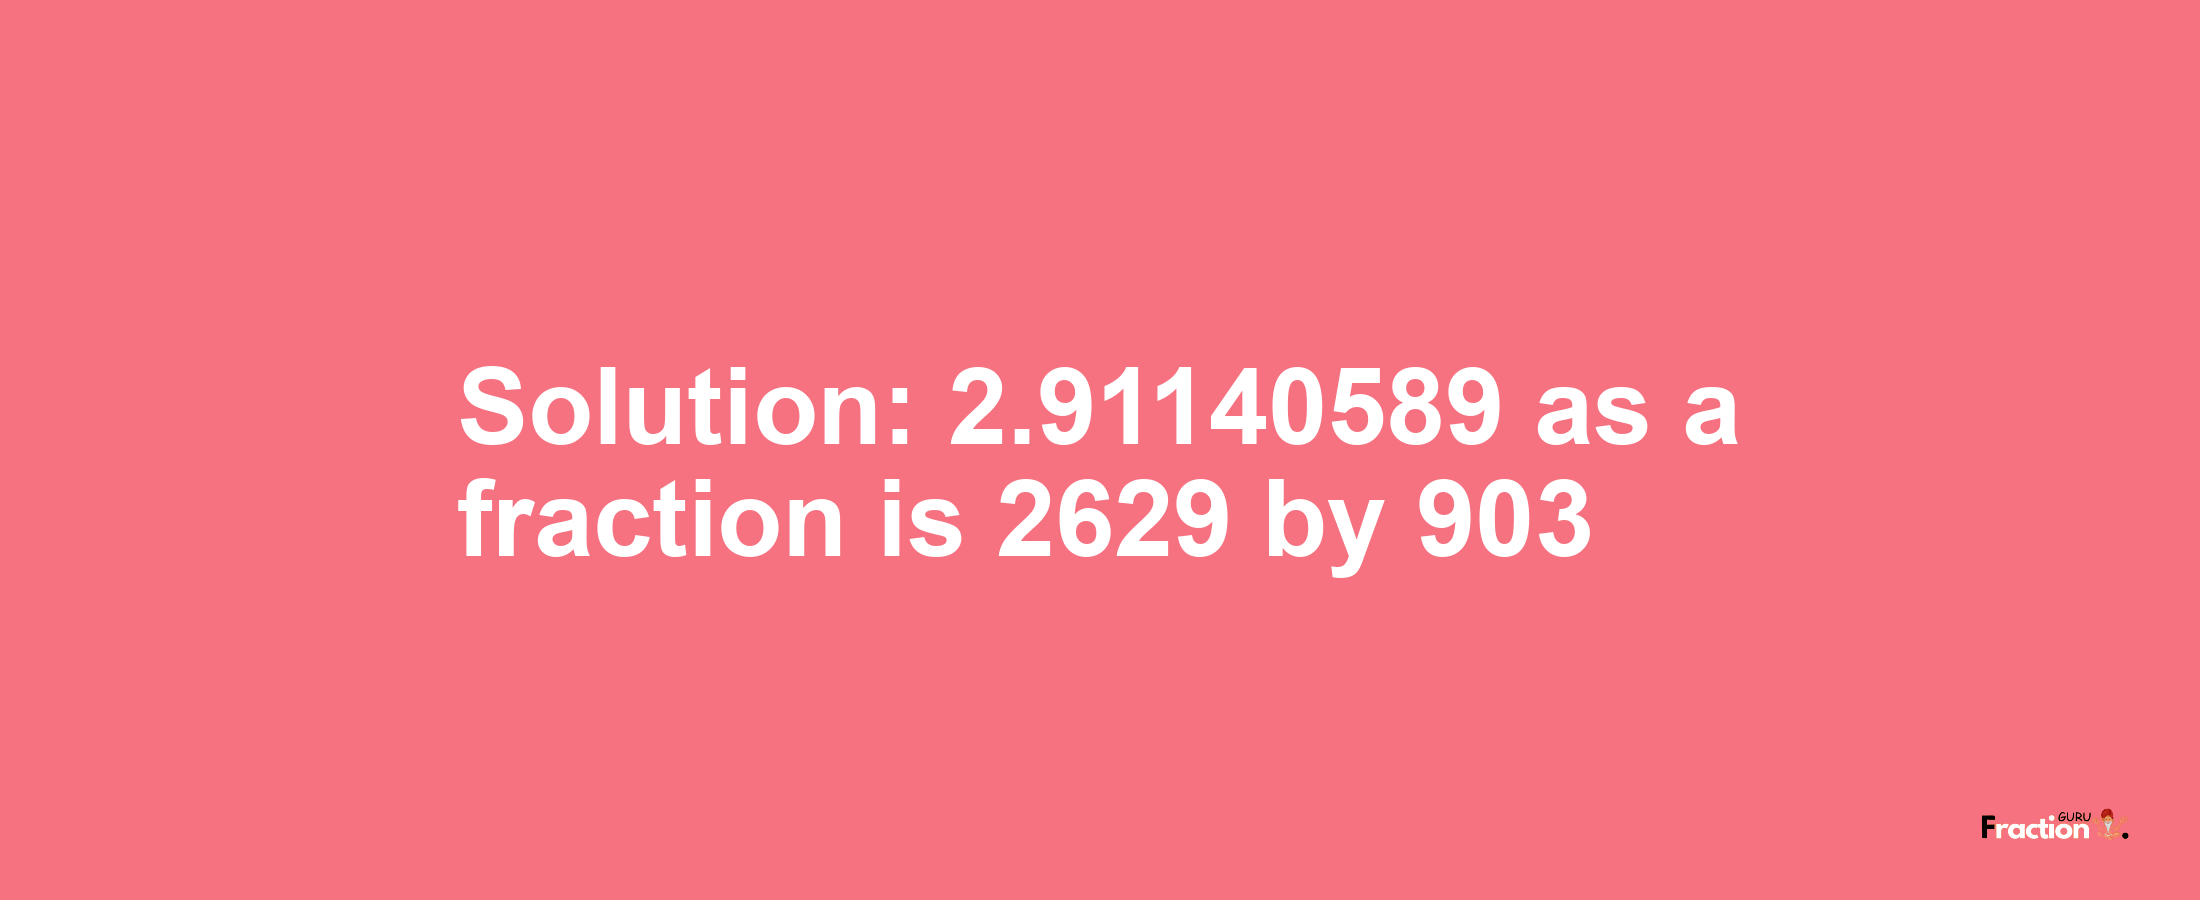 Solution:2.91140589 as a fraction is 2629/903